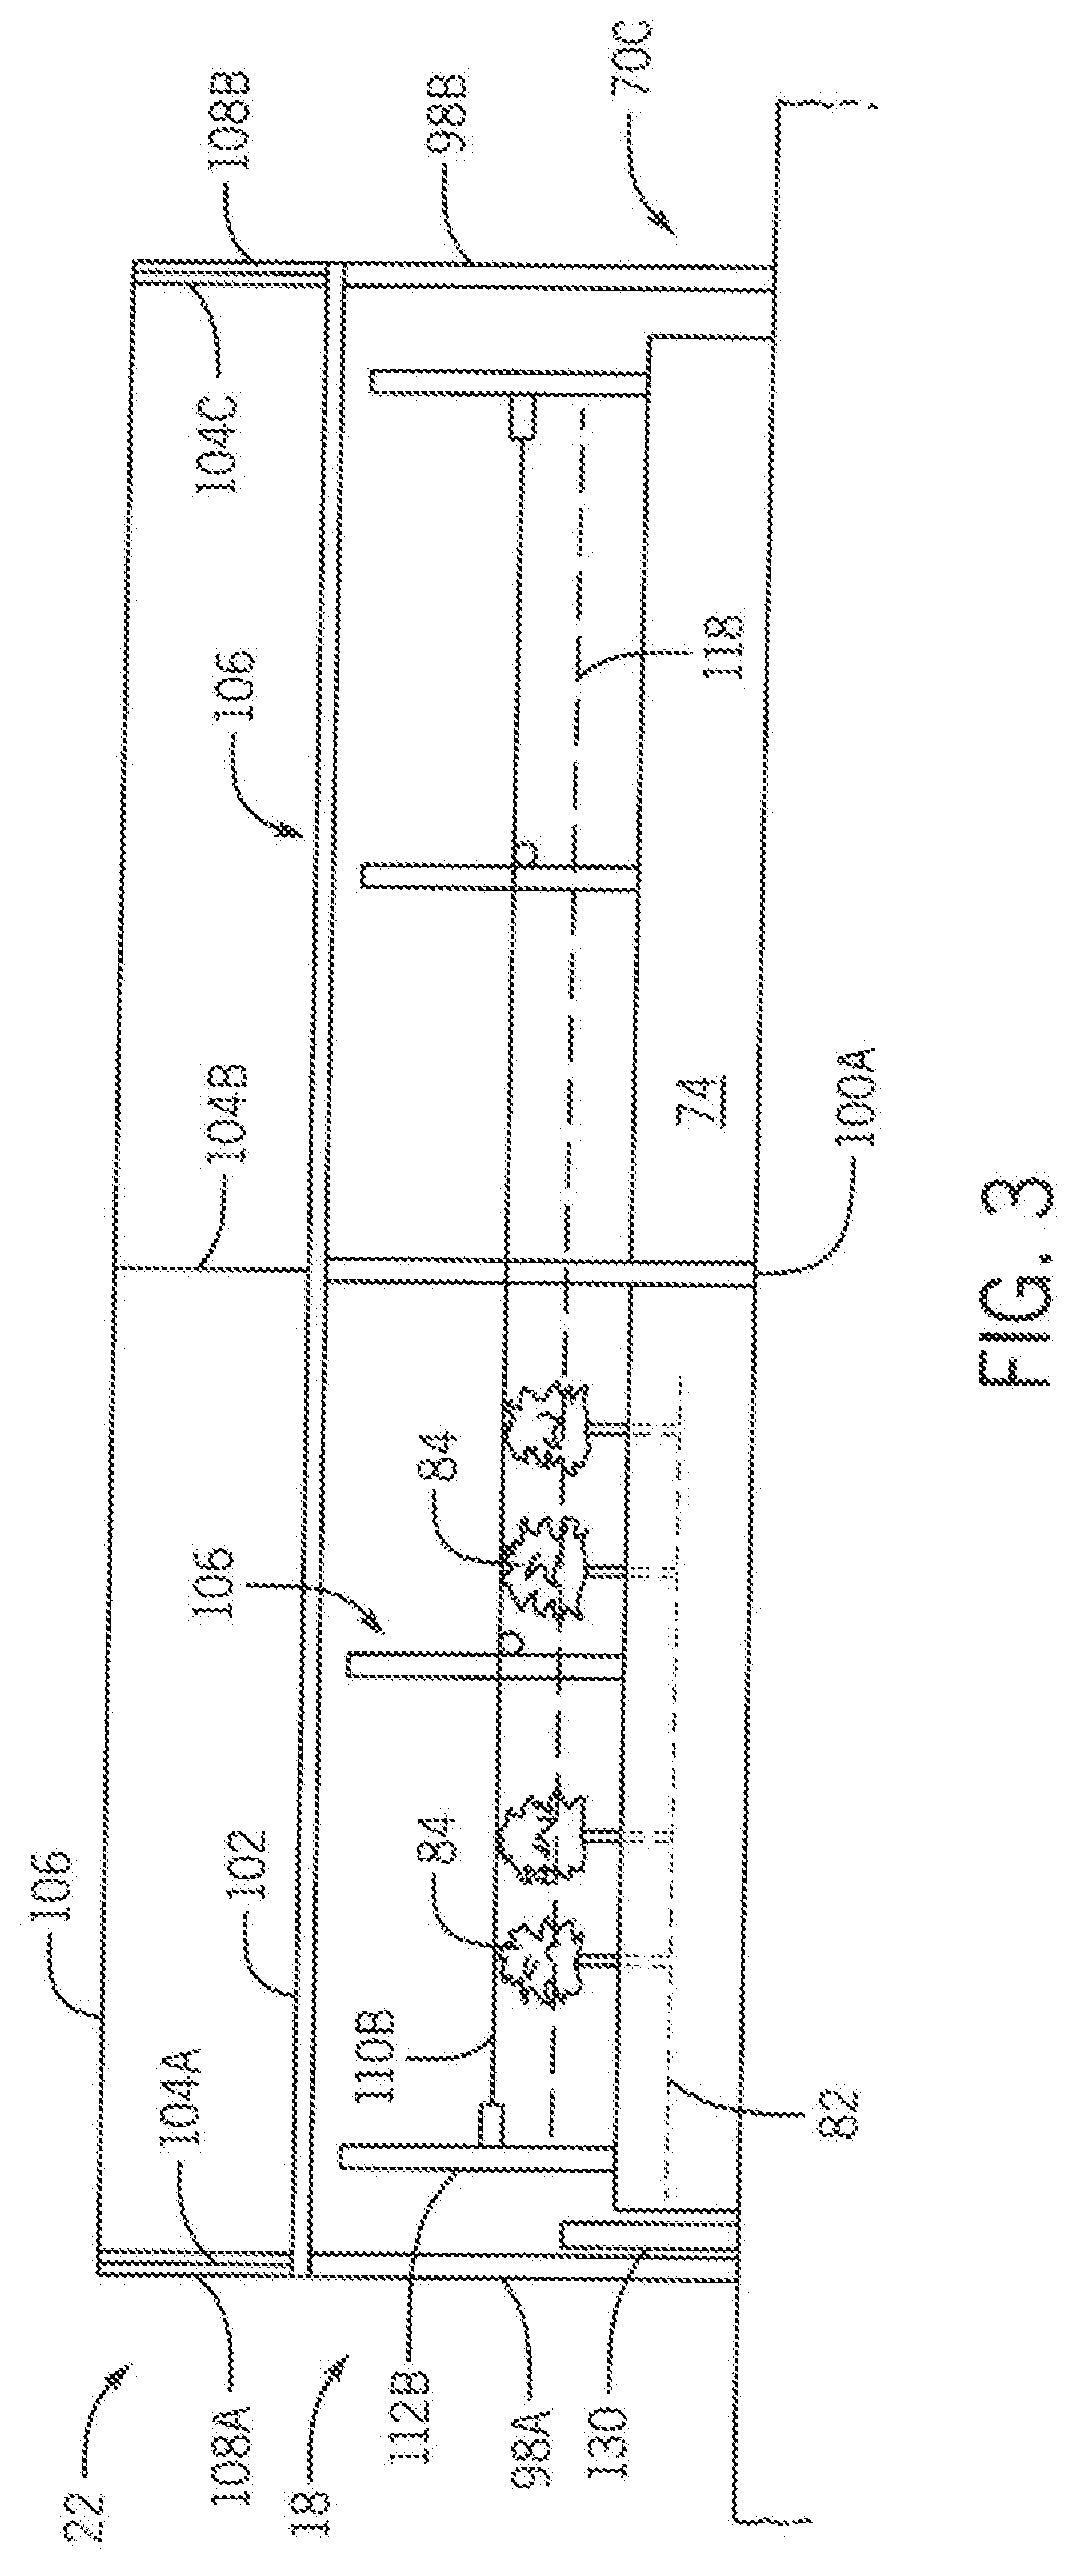 Adjustable system and apparatus for promoting plant growth and production